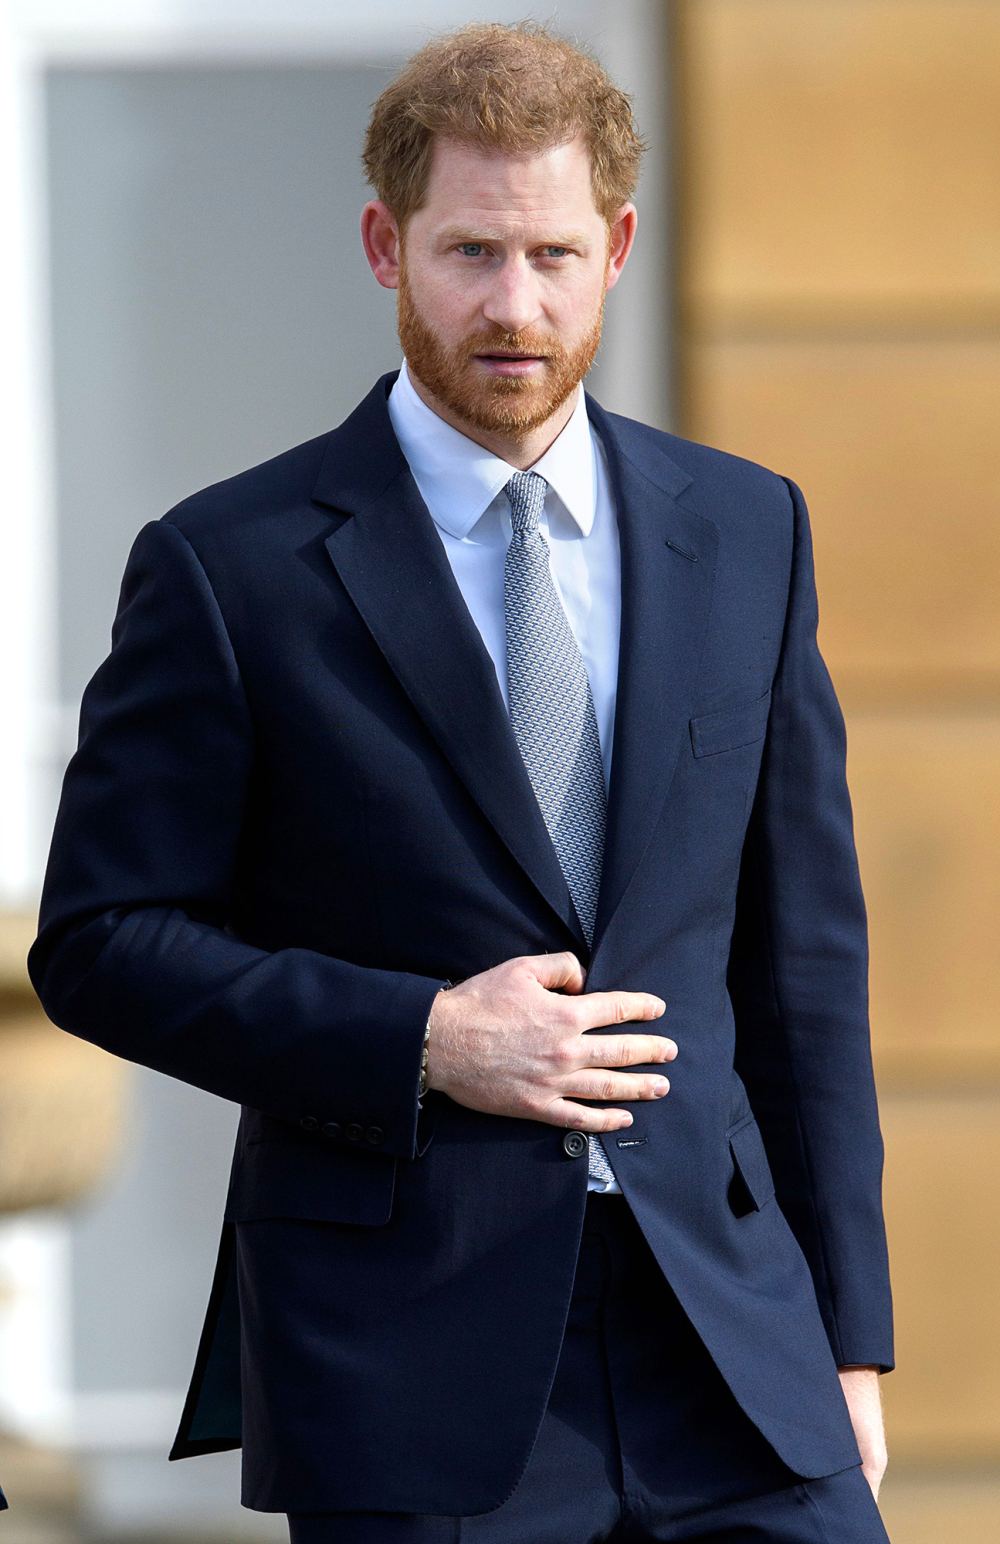 Prince Harry Applies for Judicial Review to Pay for Security During Visits to the UK